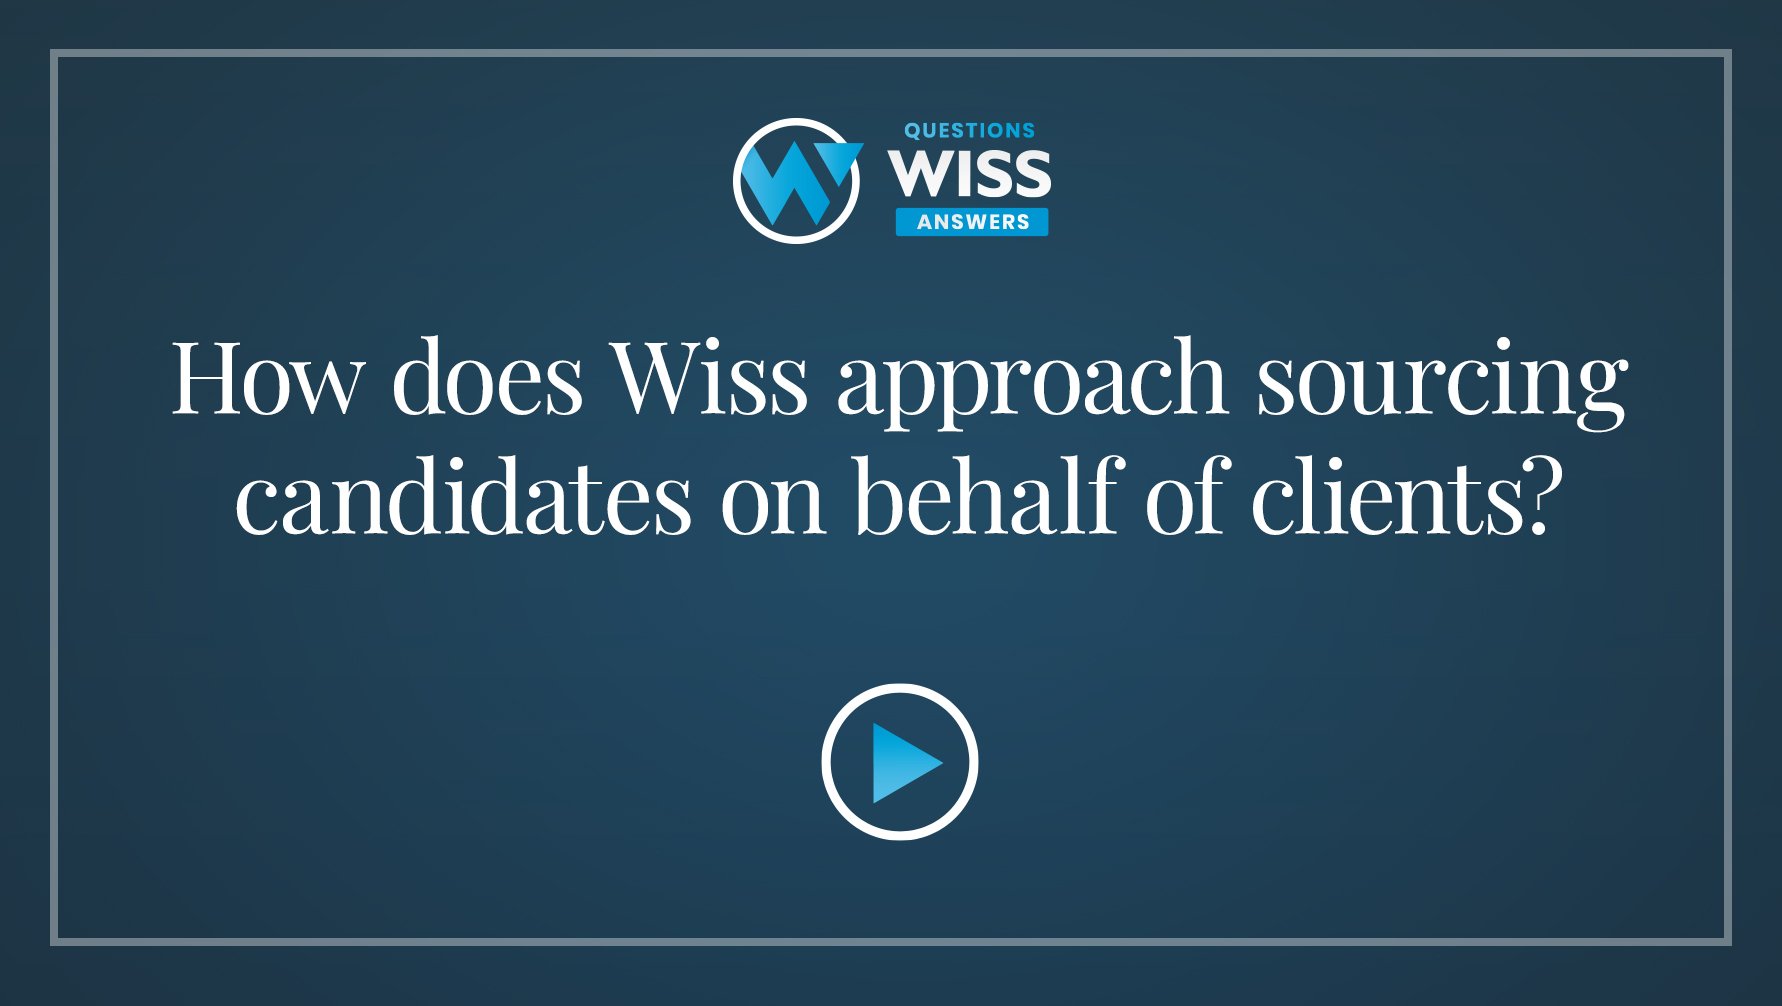 How does Wiss approach sourcing candidates on behalf of clients?